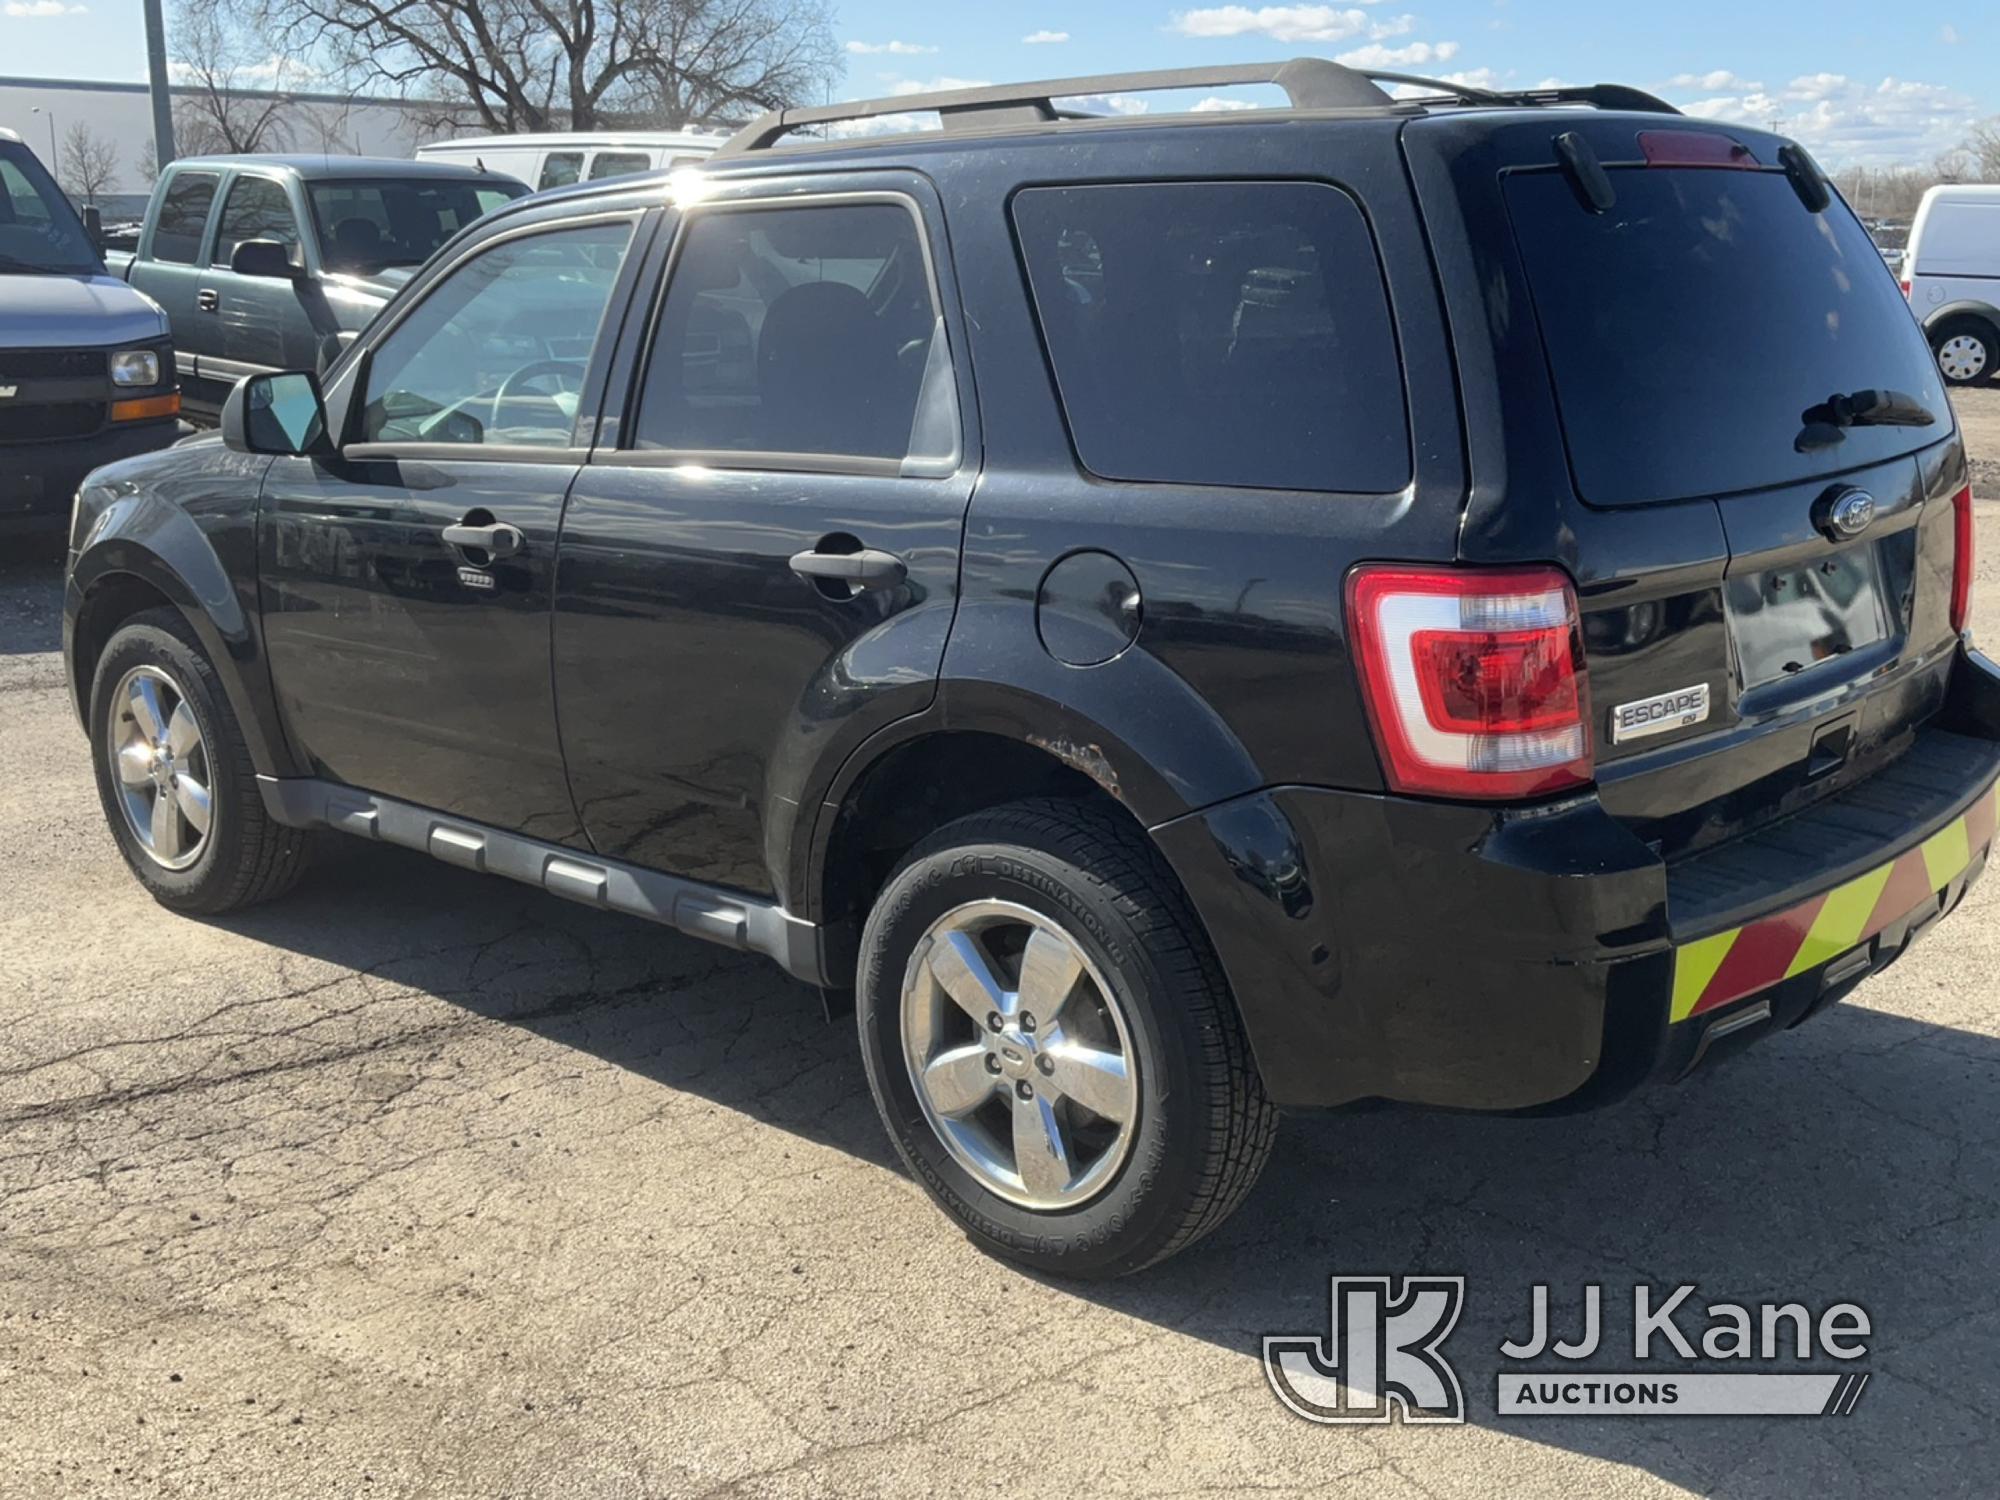 (South Beloit, IL) 2012 Ford Escape AWD Sport Utility Vehicle Runs & Moves) (Jump to Start-Needs Bat